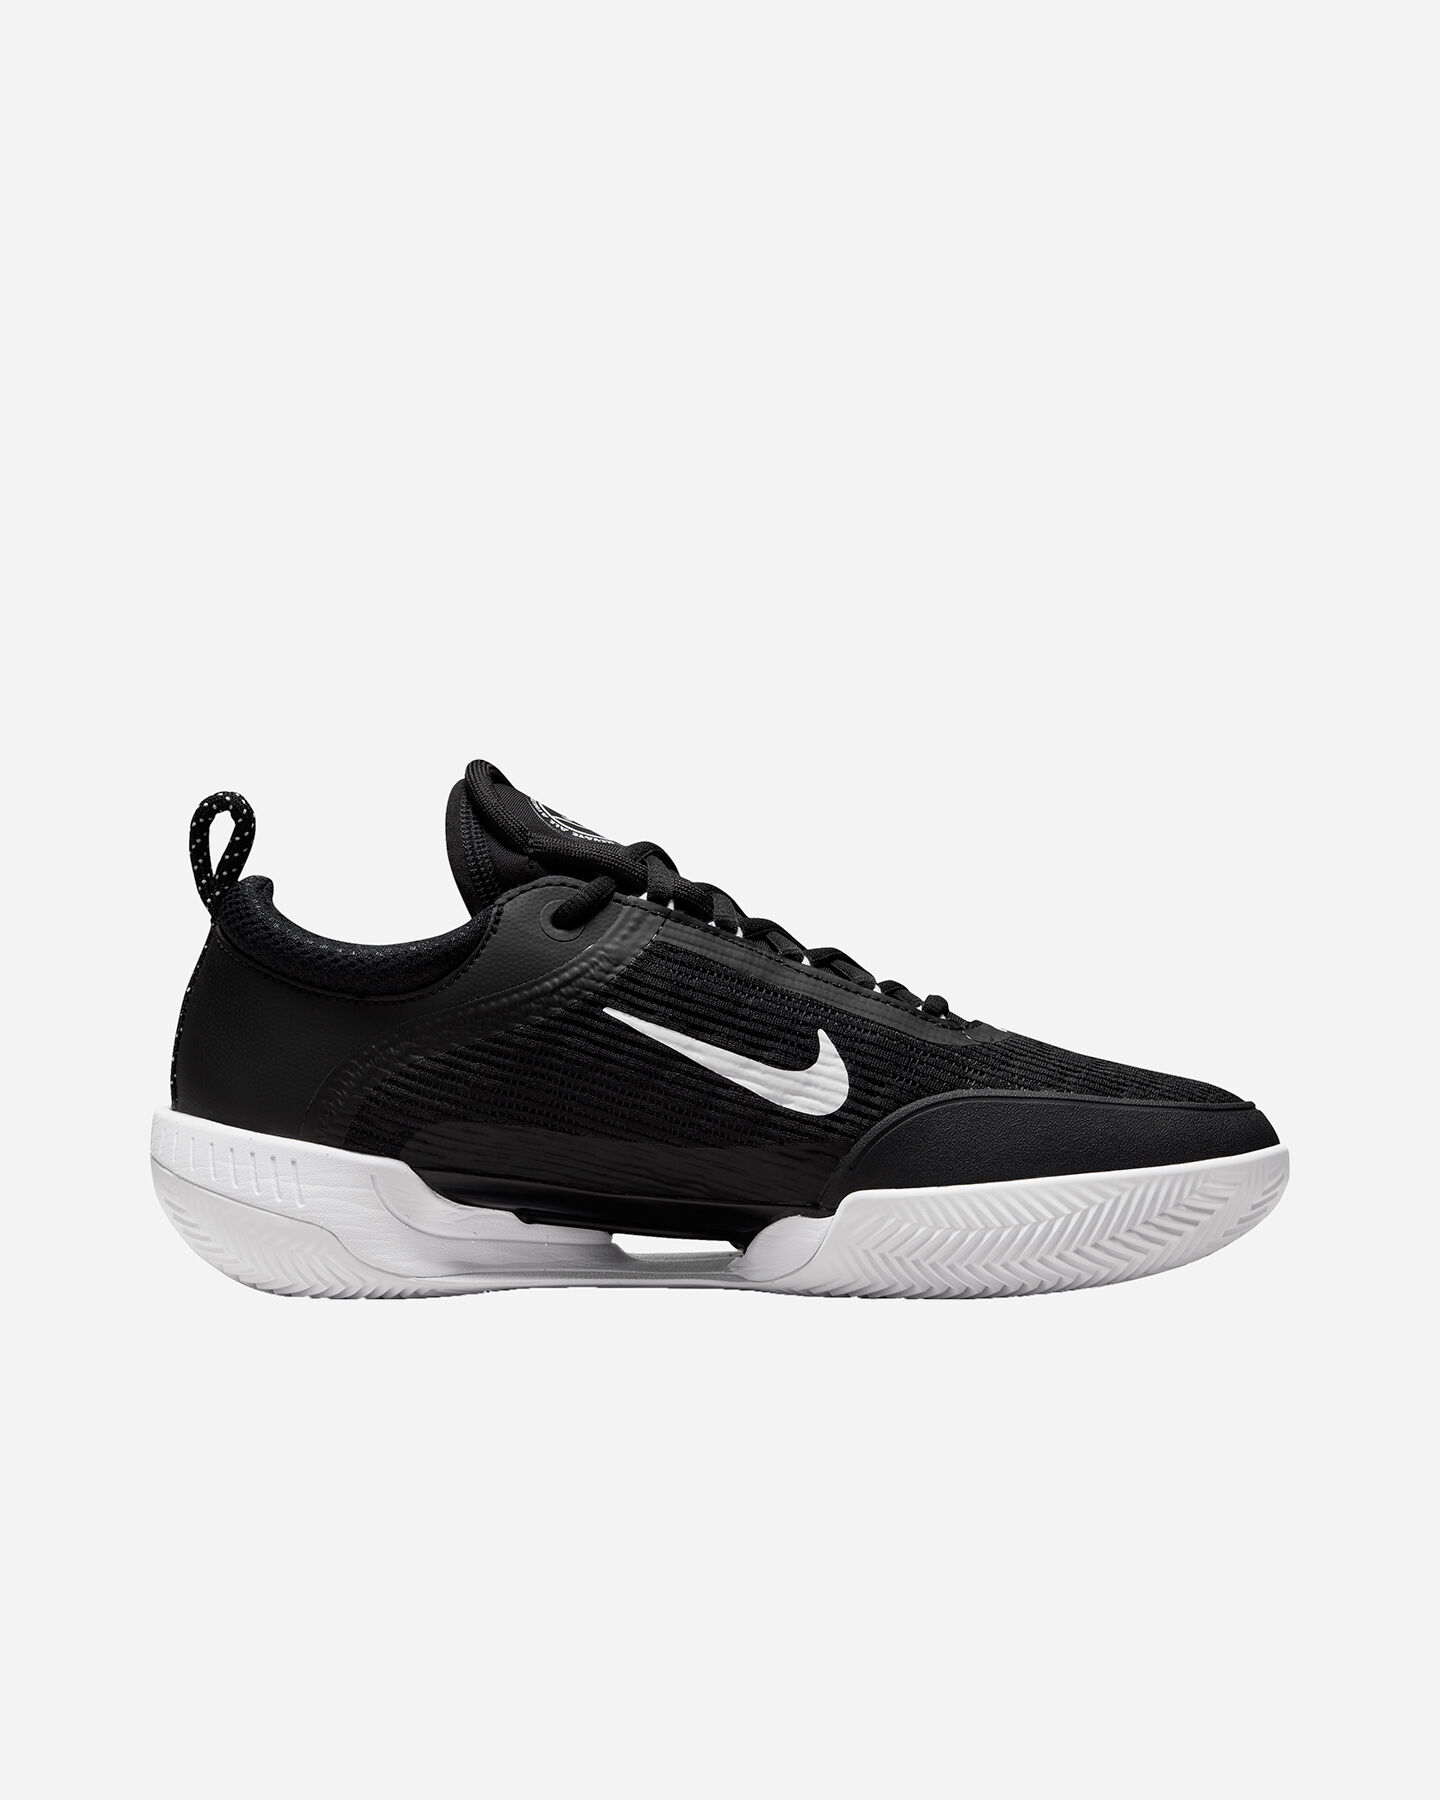  Scarpe tennis NIKE COURT ZOOM NXT CLAY M S5373028 scatto 0